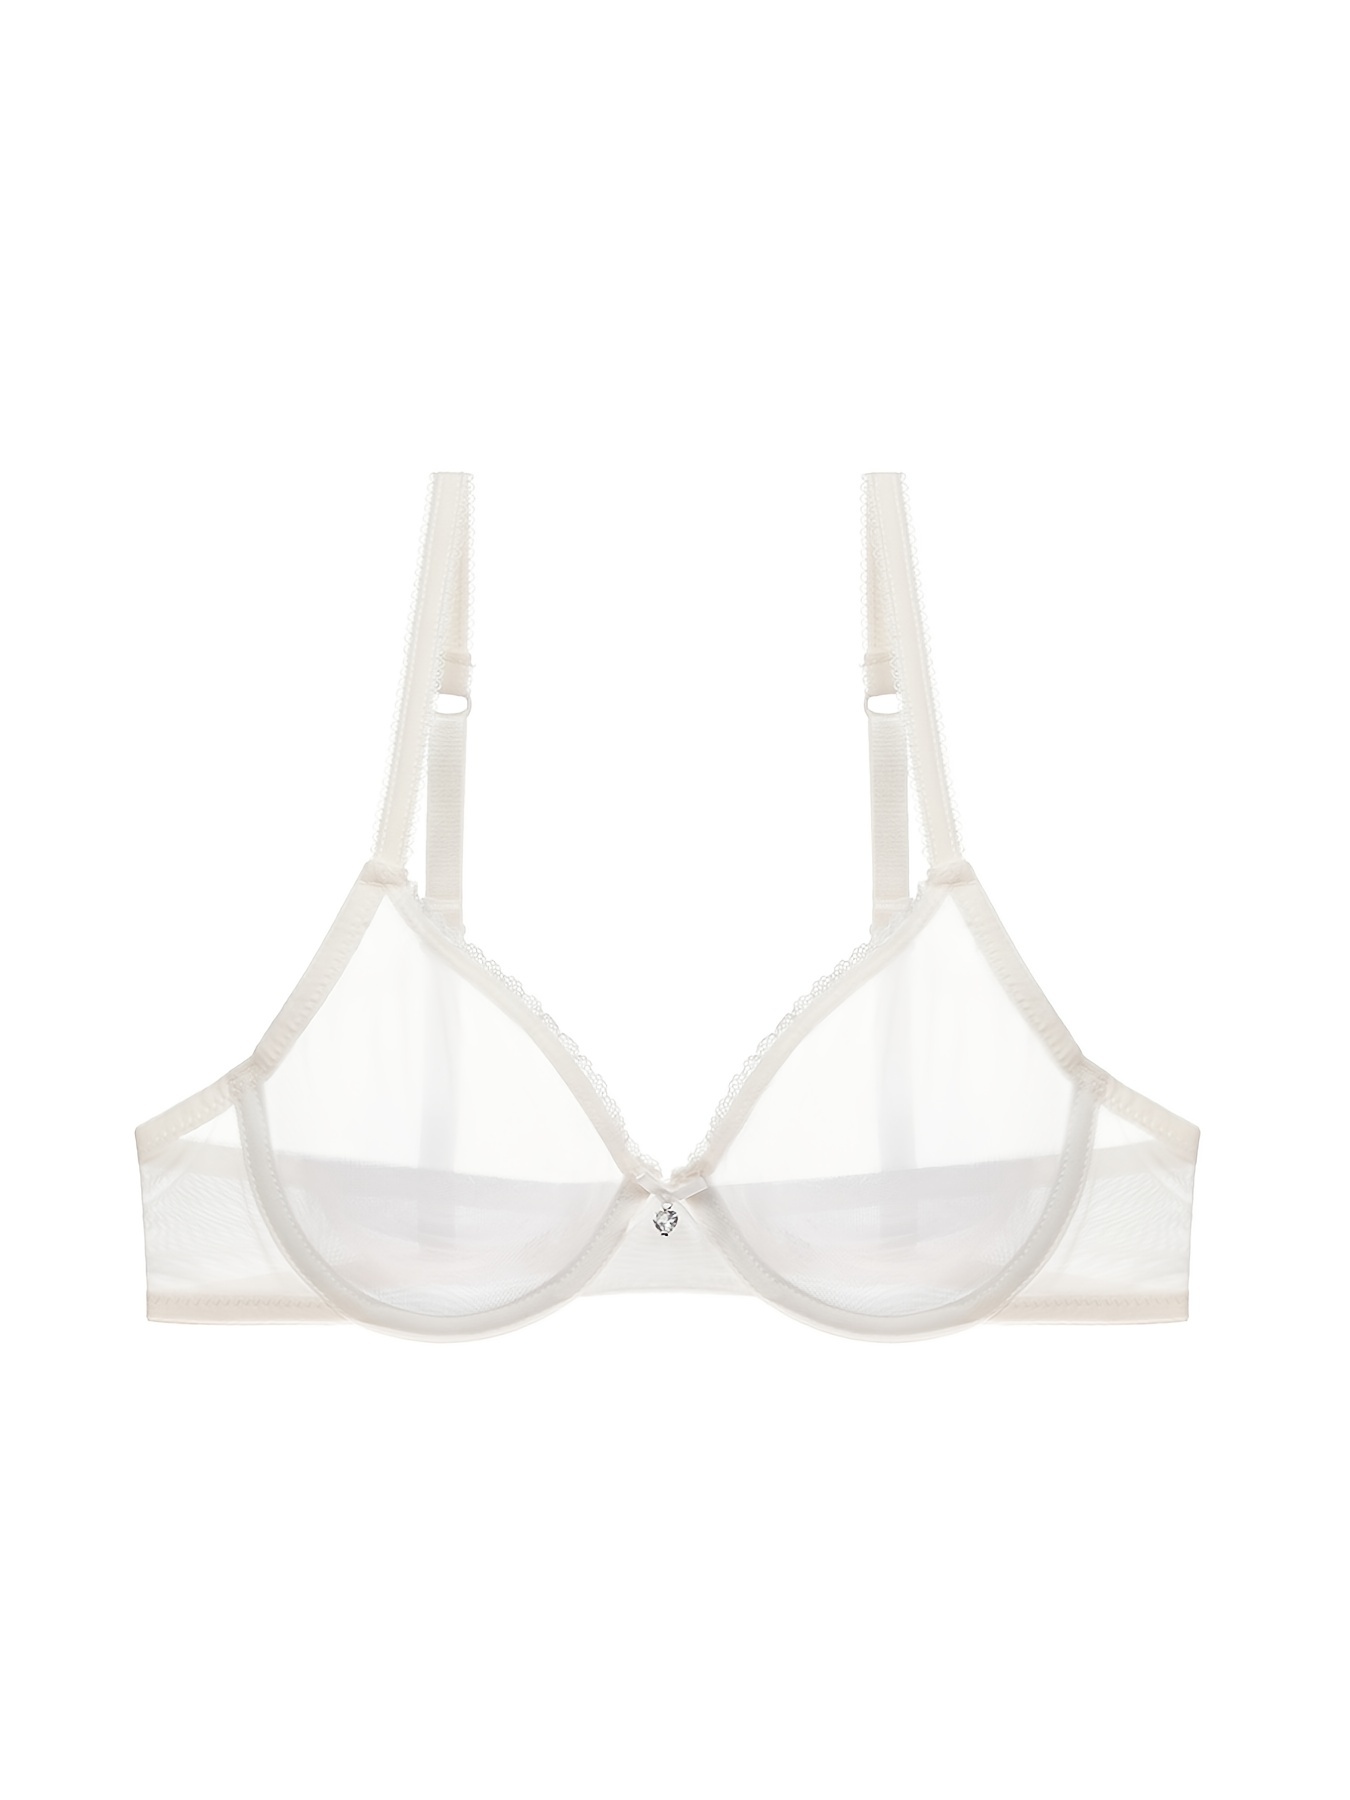 See Through Mesh Sheer Bra and Panty Ultra-thin Sexy White Unlined